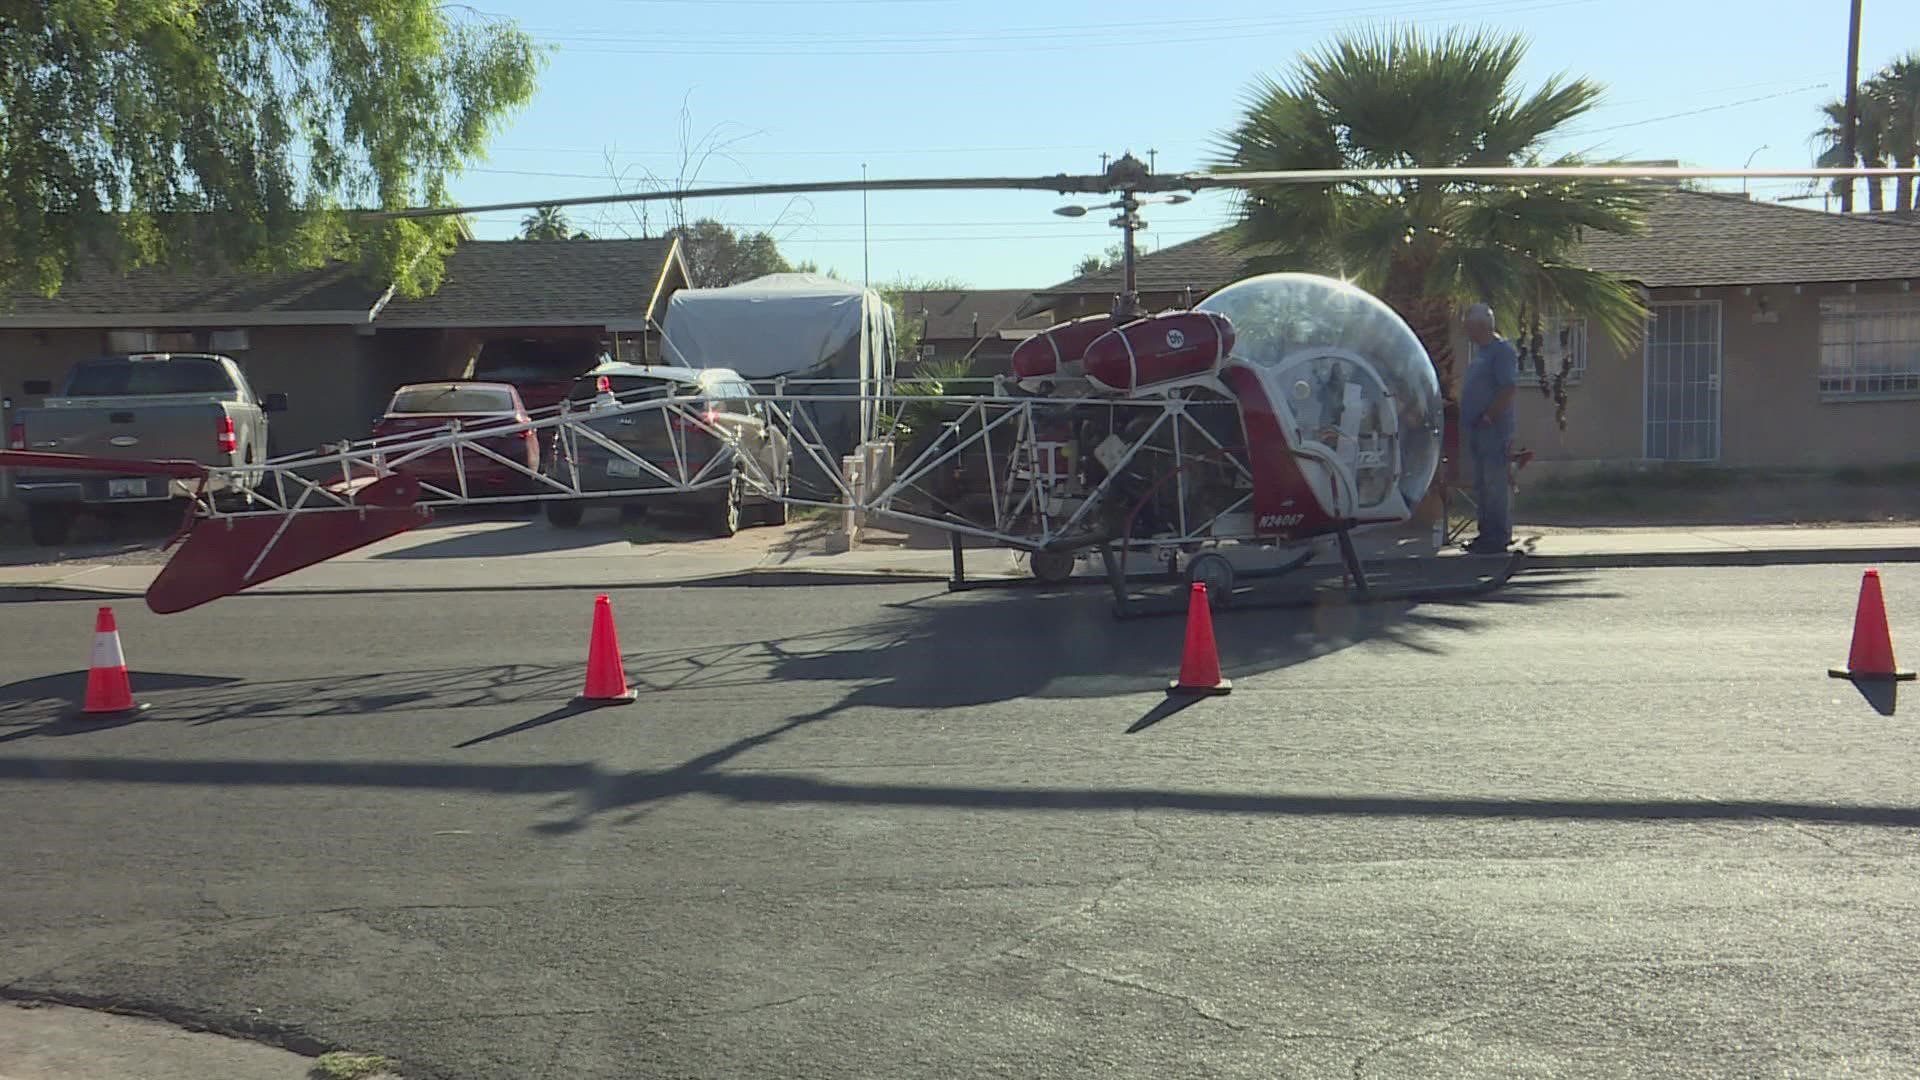 Fortunately, no one was injured after the small aircraft suffered an unknown issue and was forced to land at a Mesa intersection.